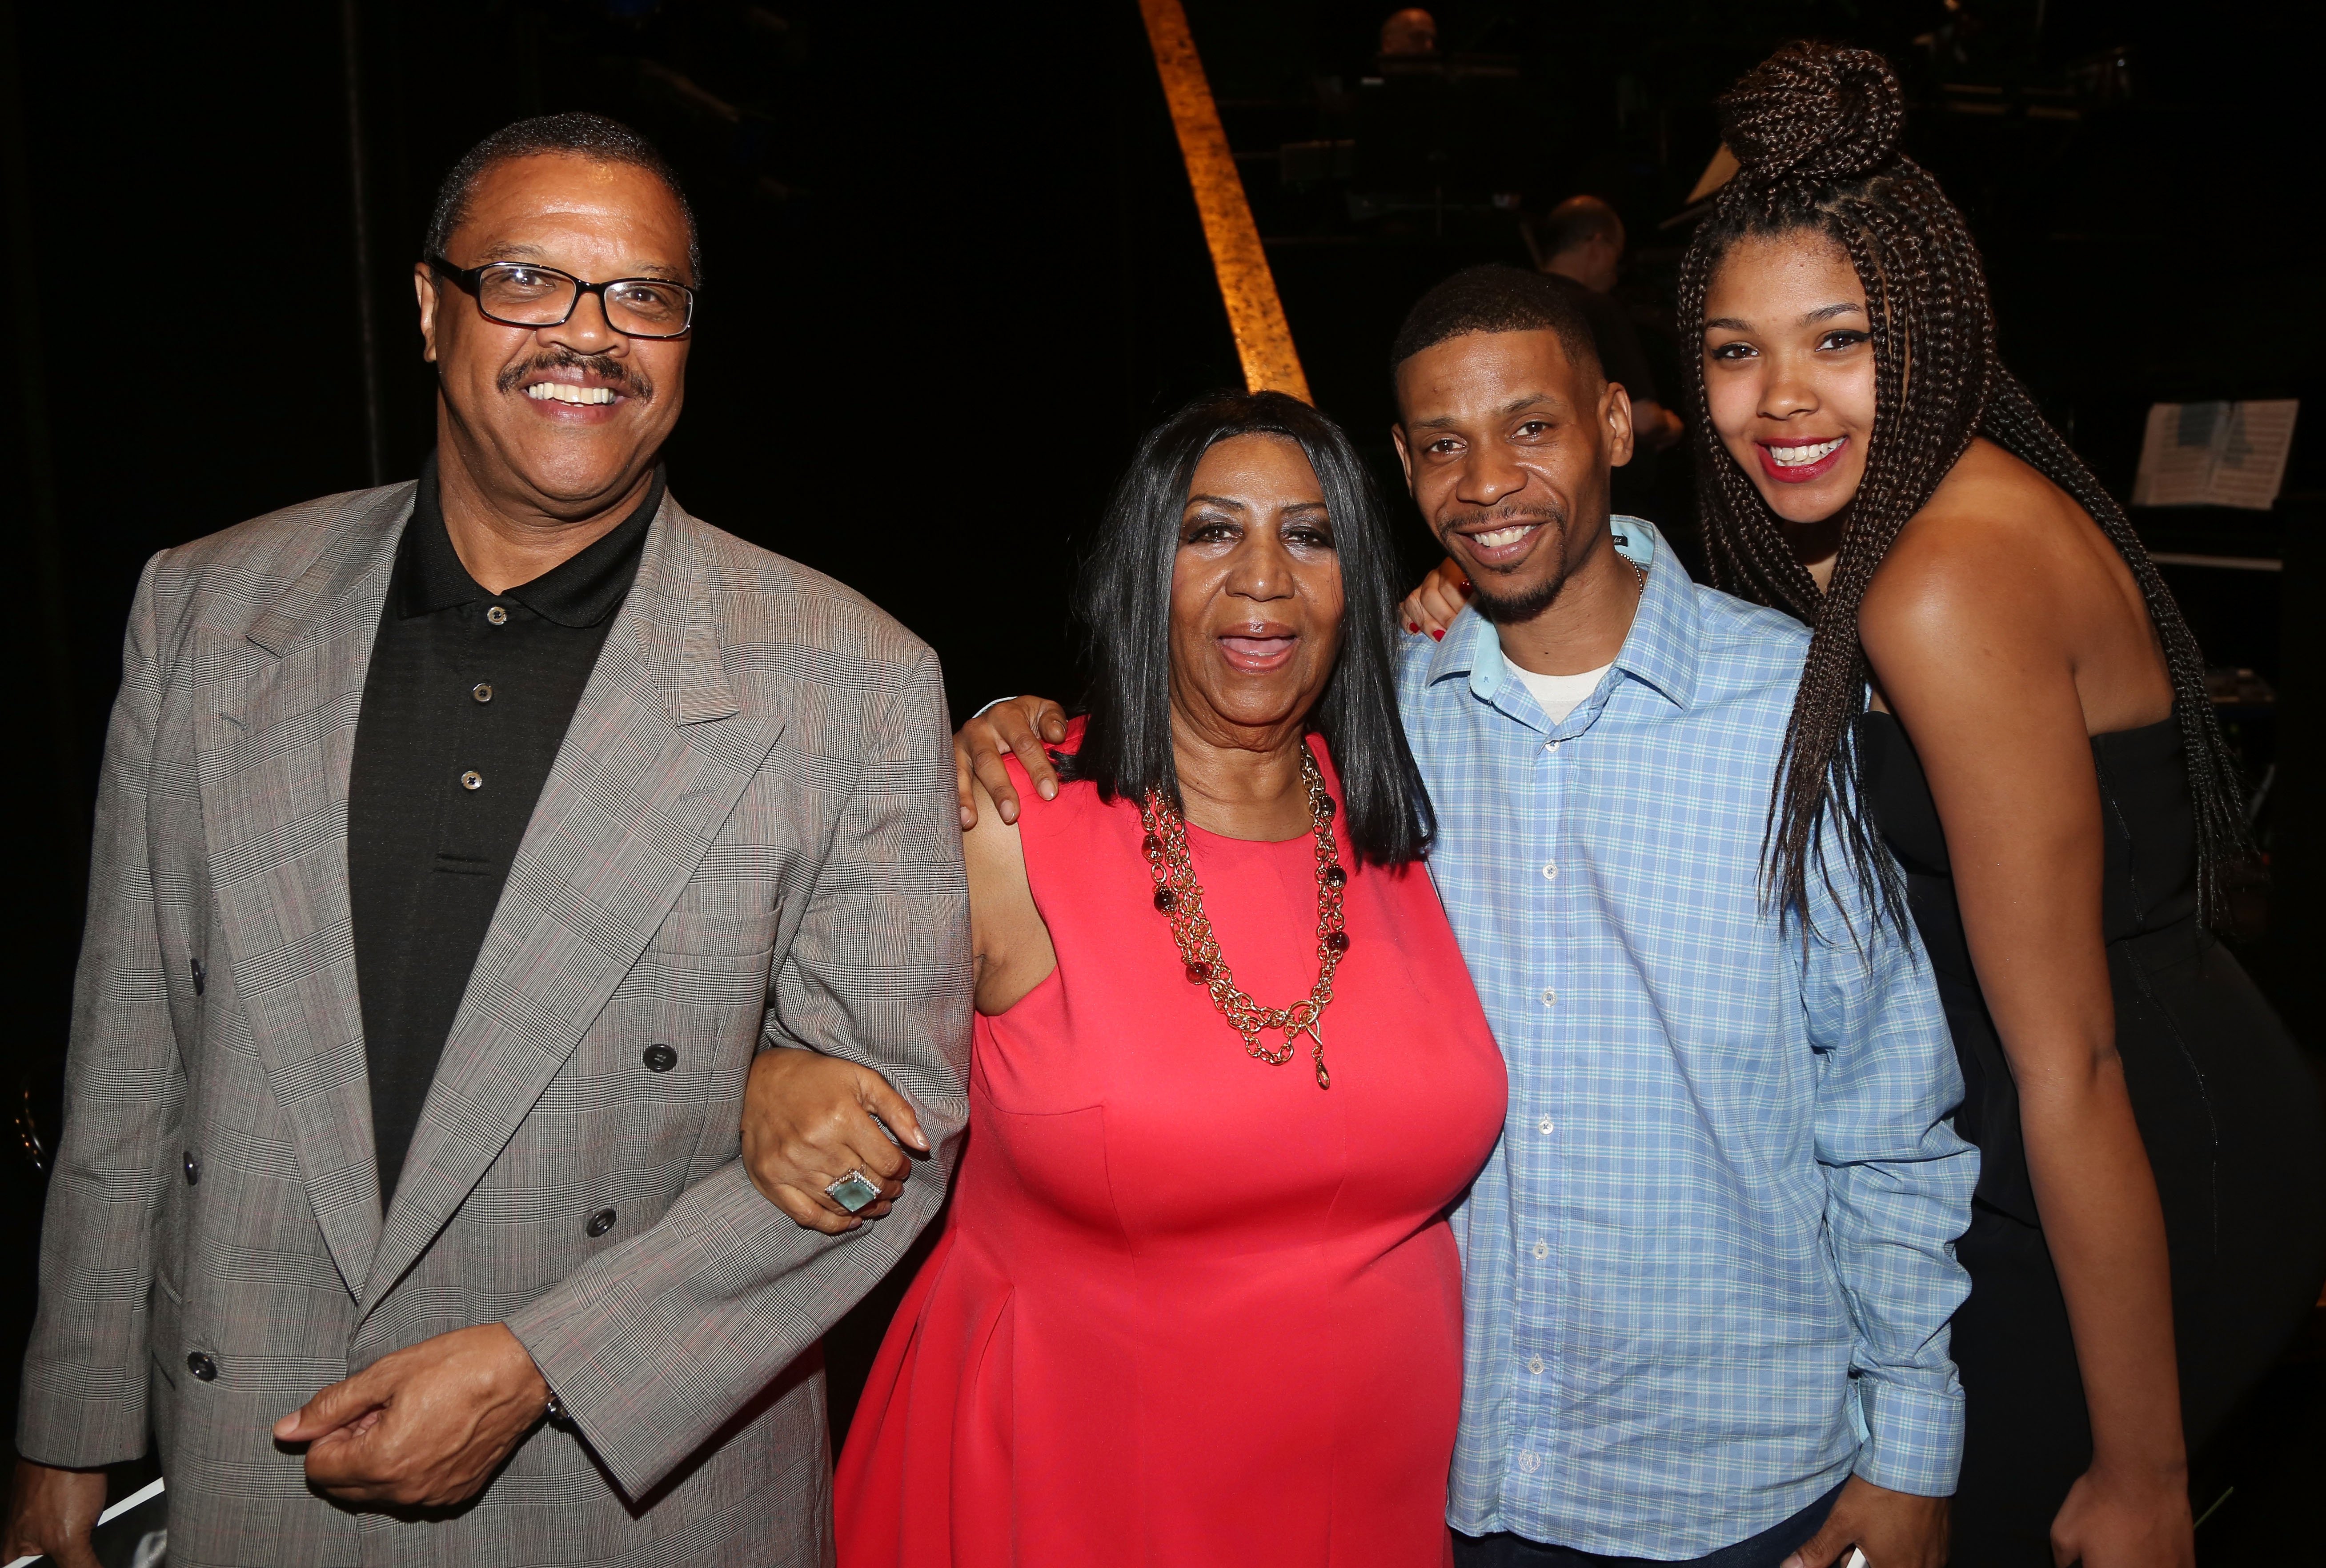 Willie Wilkerson, Aretha Franklin, Kecalf Cunningham and Victorie Cunningham at the musical "Chicago" on May 29, 2015 in New York City | Source: Getty Images